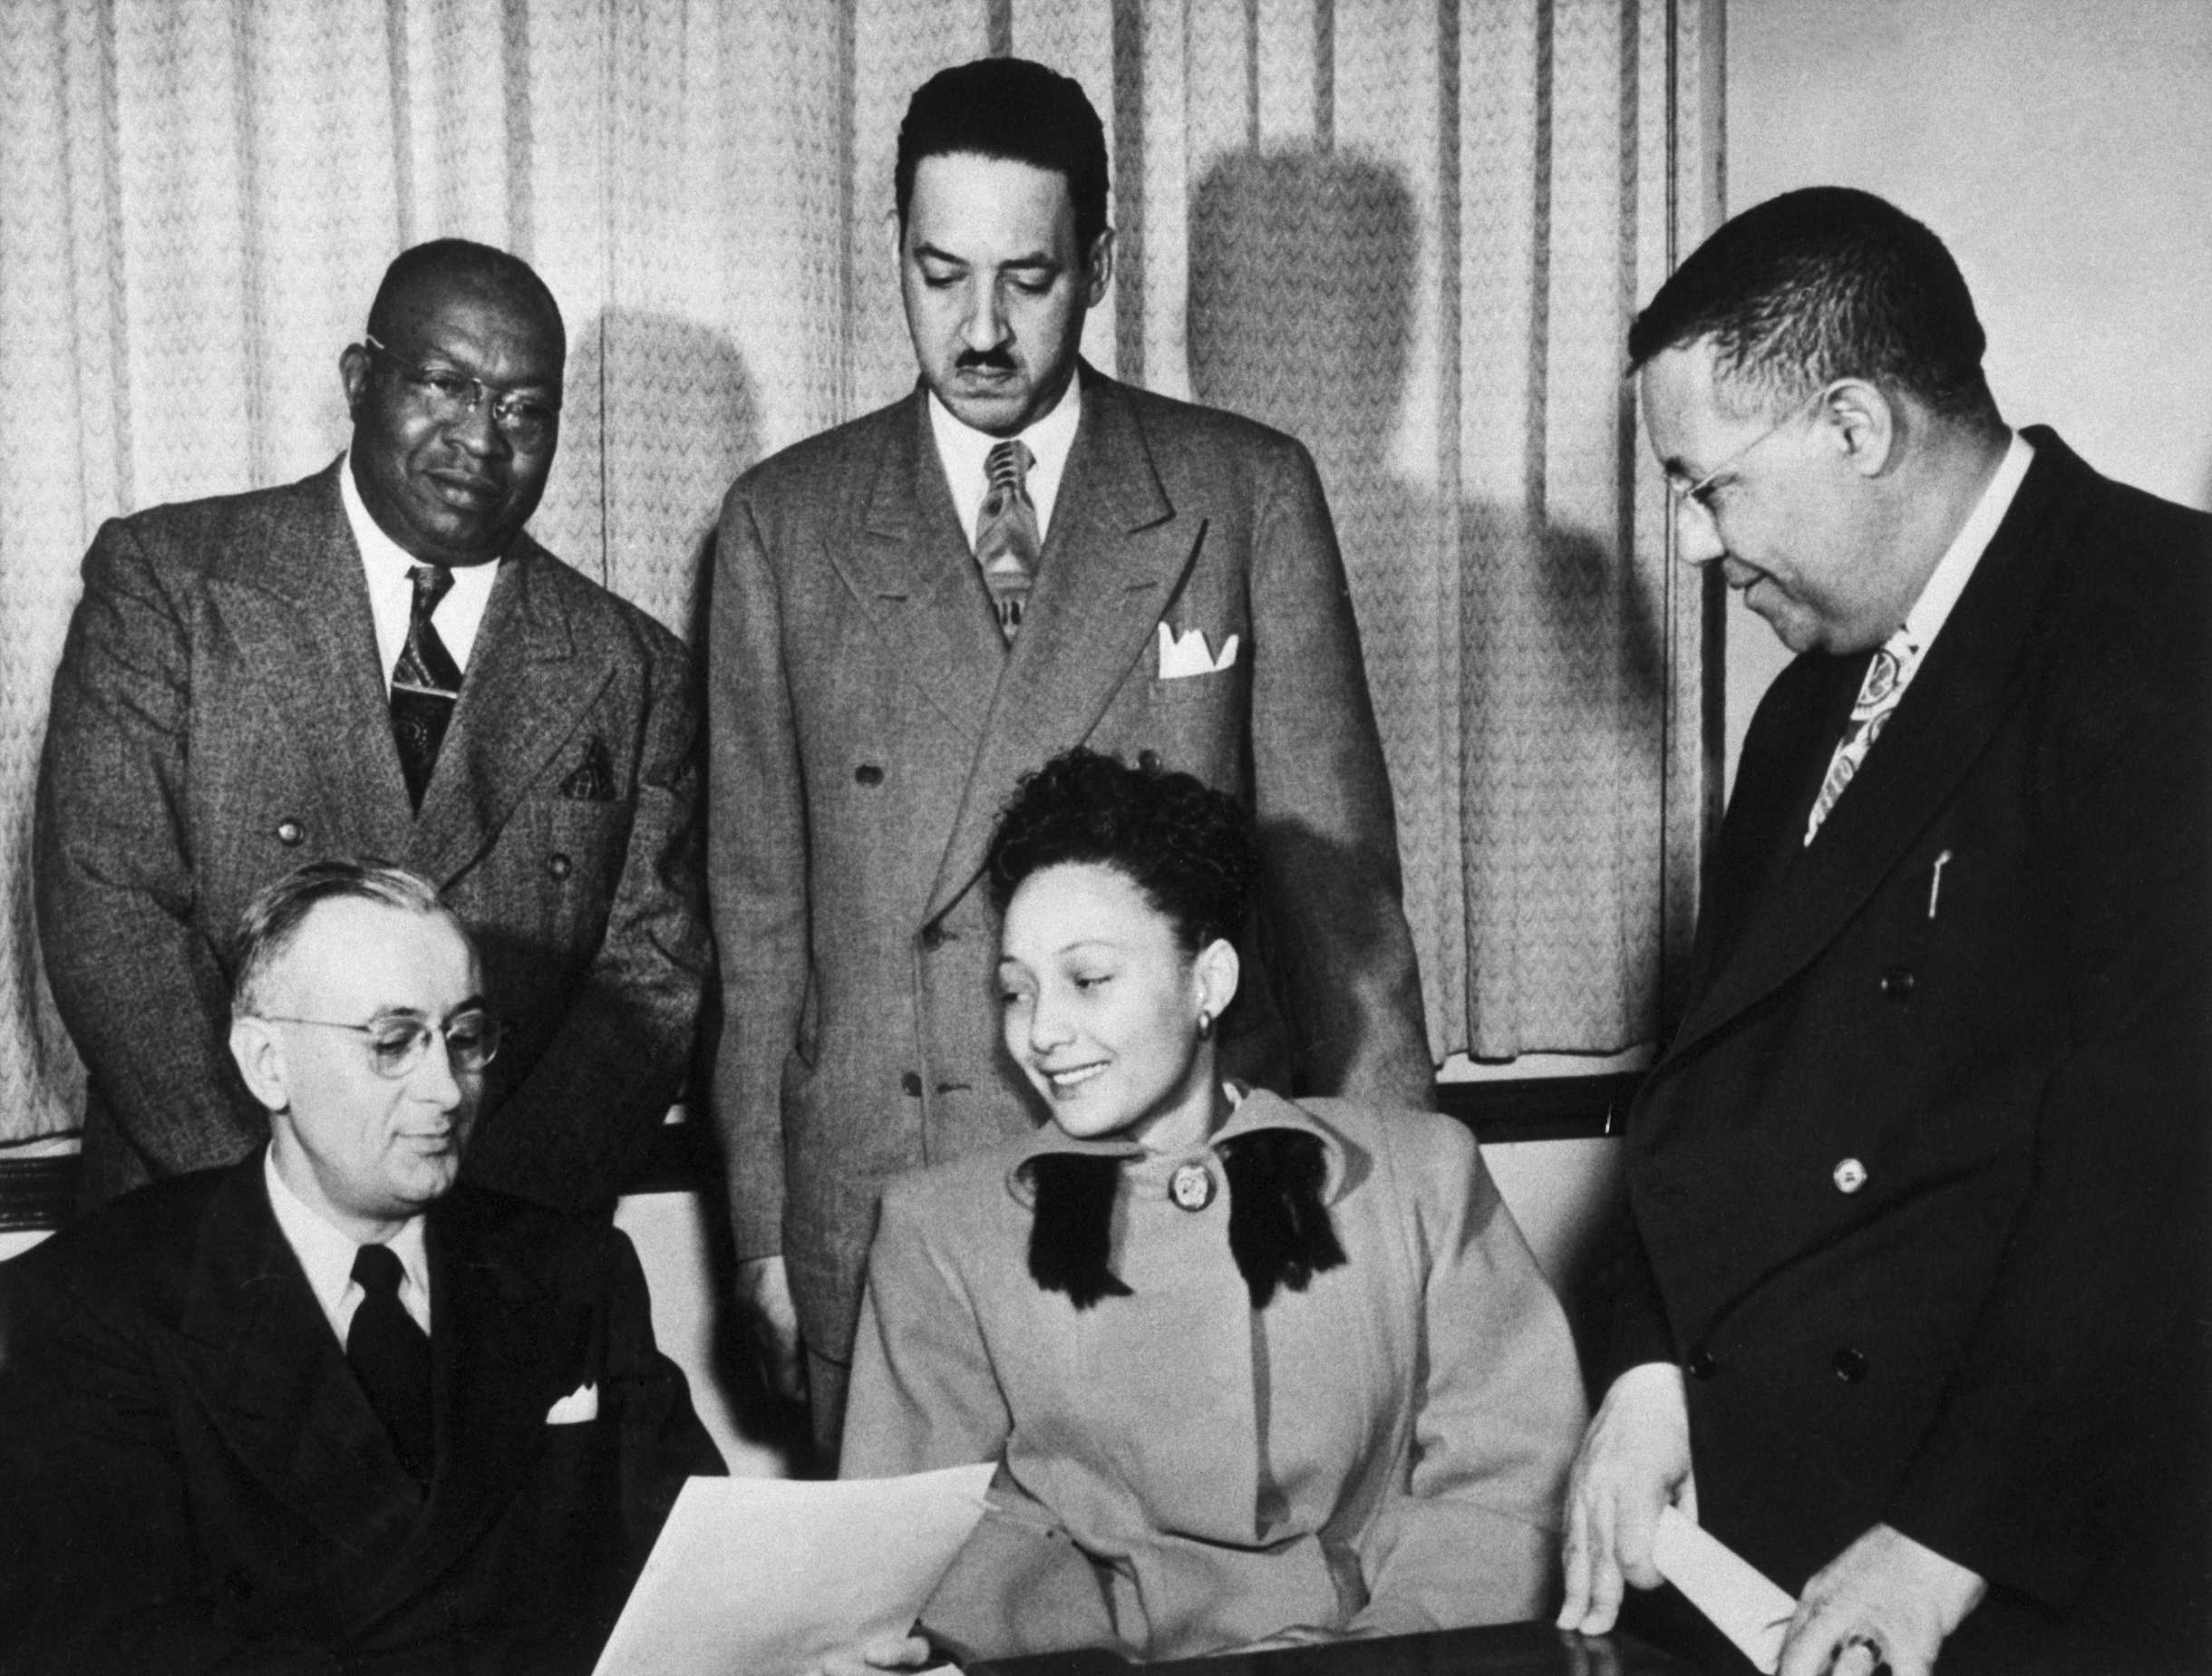 Black and white photograph of woman seated with three men standing behind her and one next to her holding a paper.